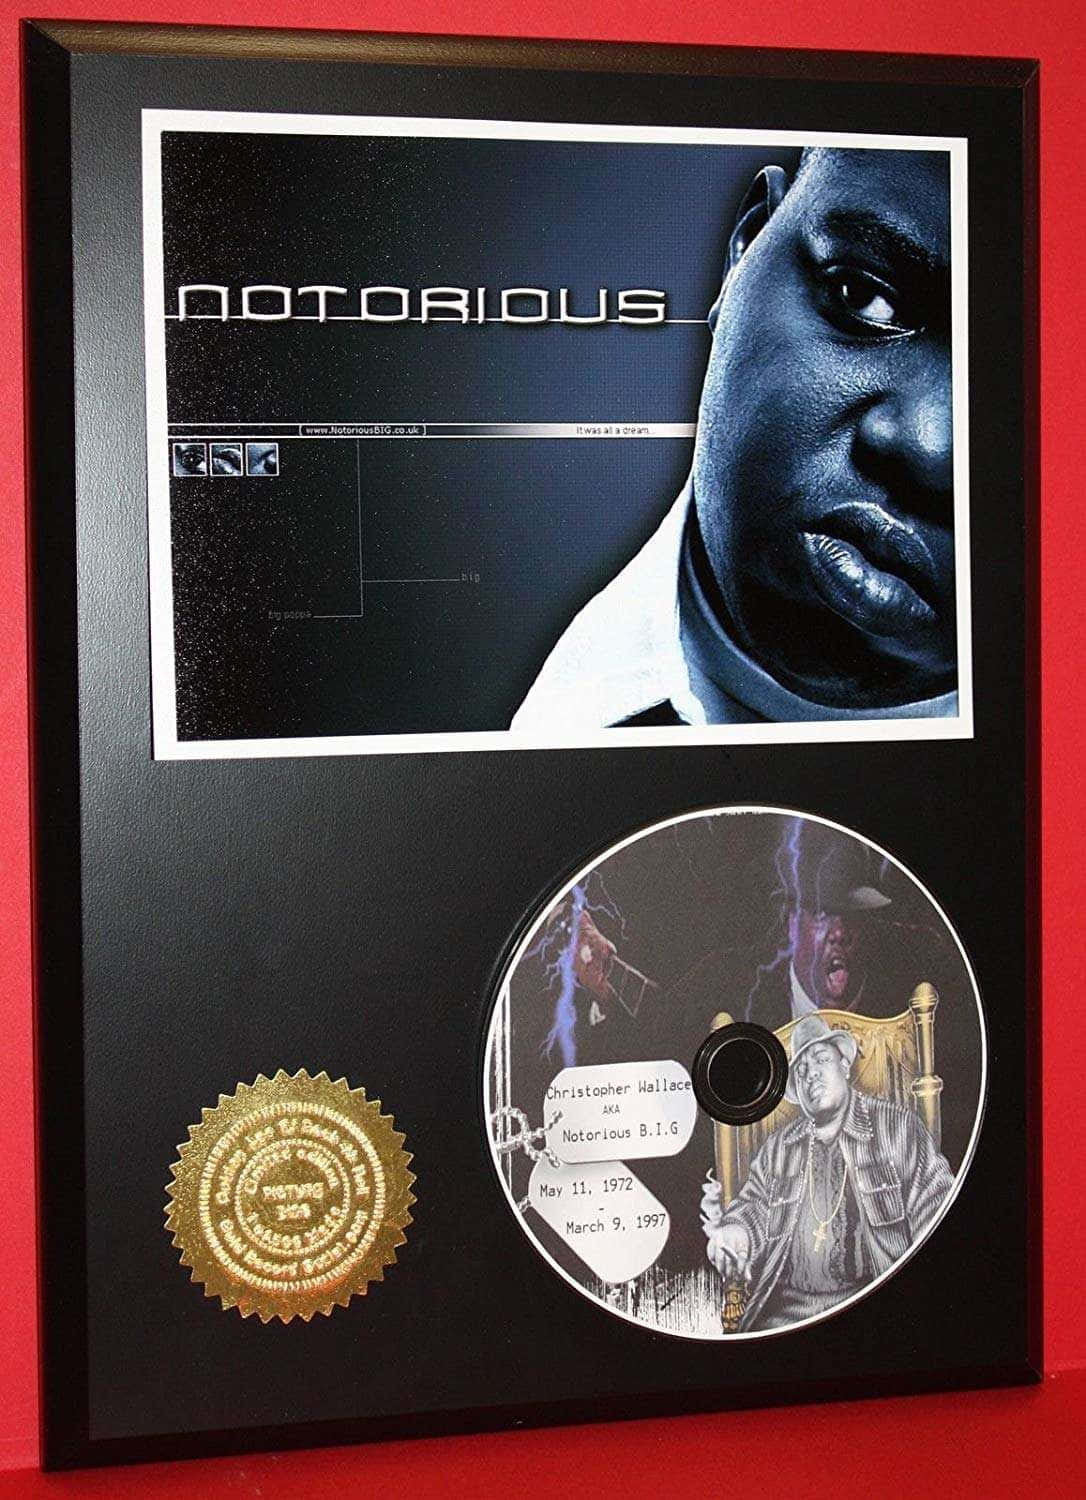 The Notorious Big Limited Edition Cd Wallpaper